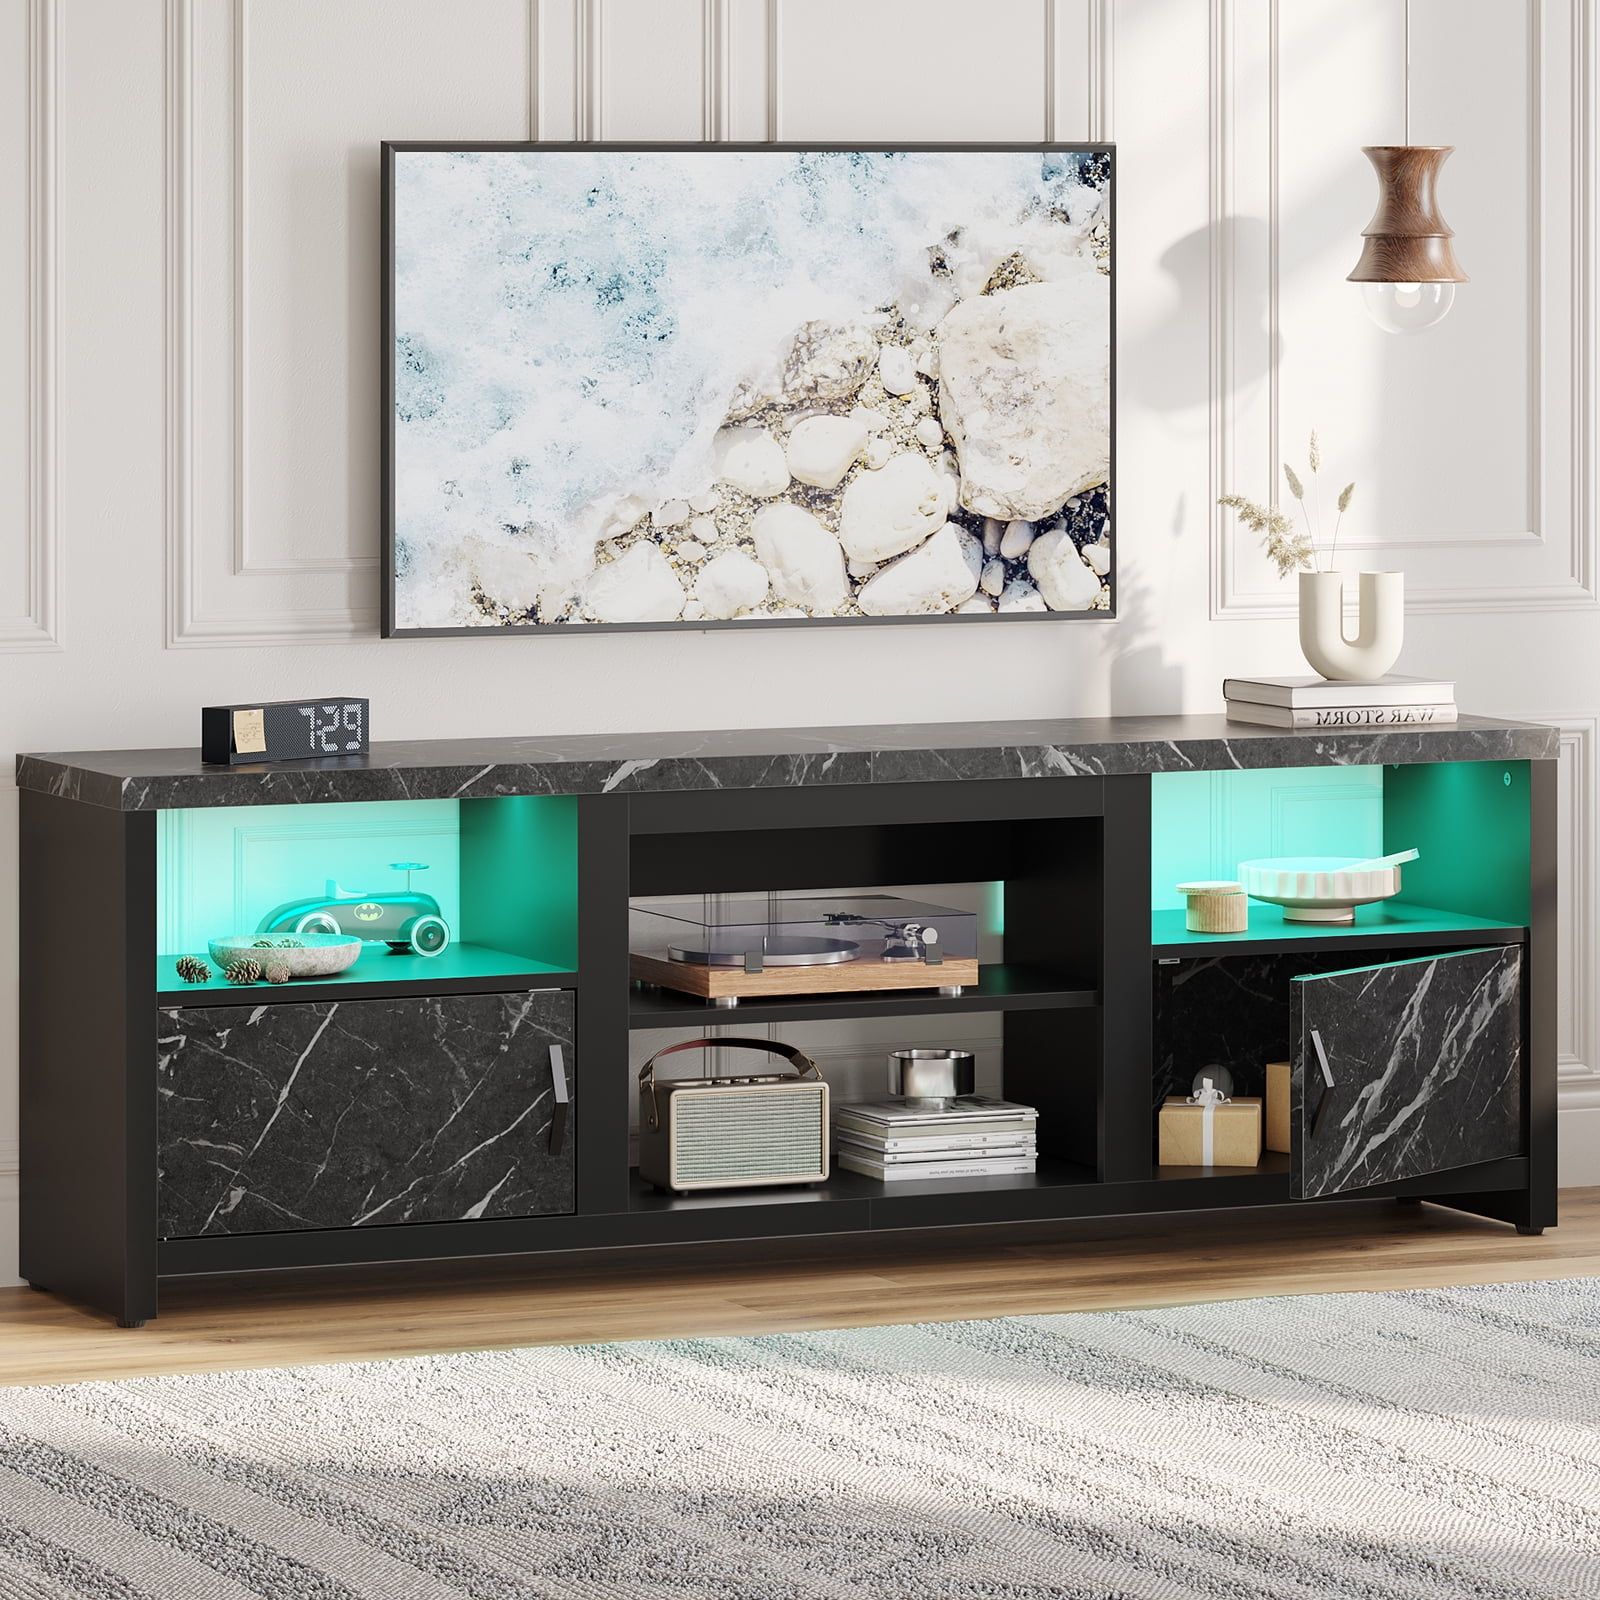 Bestier Modern Tv Stand For Tvs Up To 75" With Led Lights With Regard To Bestier Tv Stand For Tvs Up To 75" (View 9 of 20)